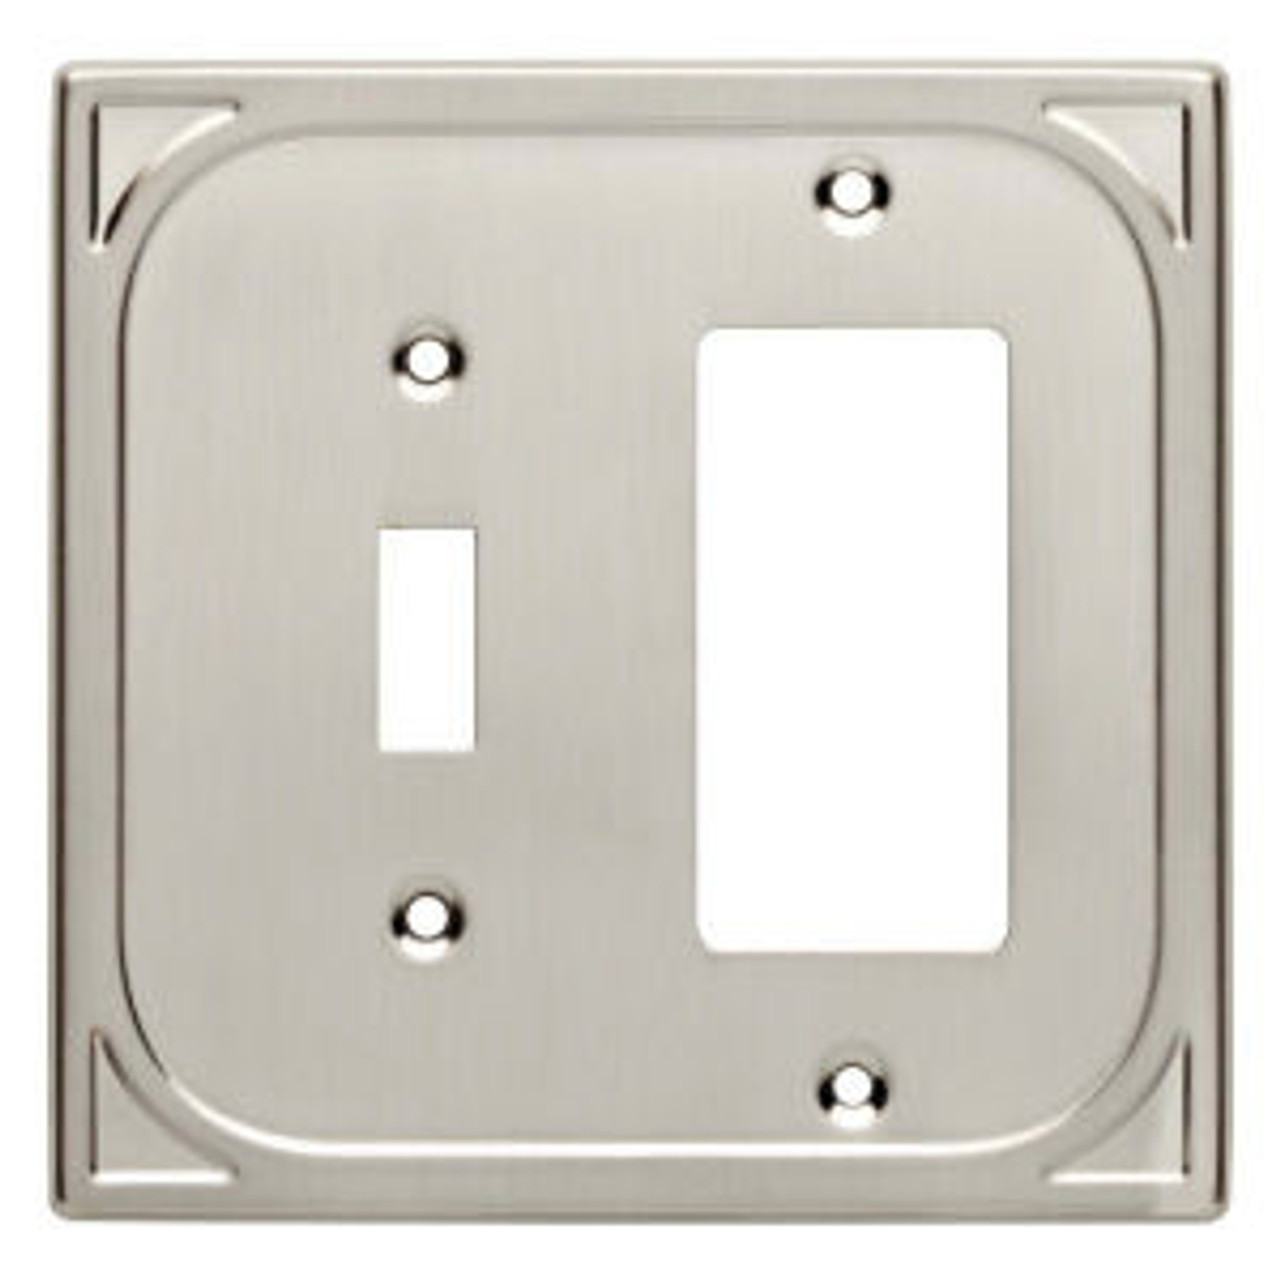 144418 Cambray Brushed Satin Nickel Switch GFCI Combo Cover Plate